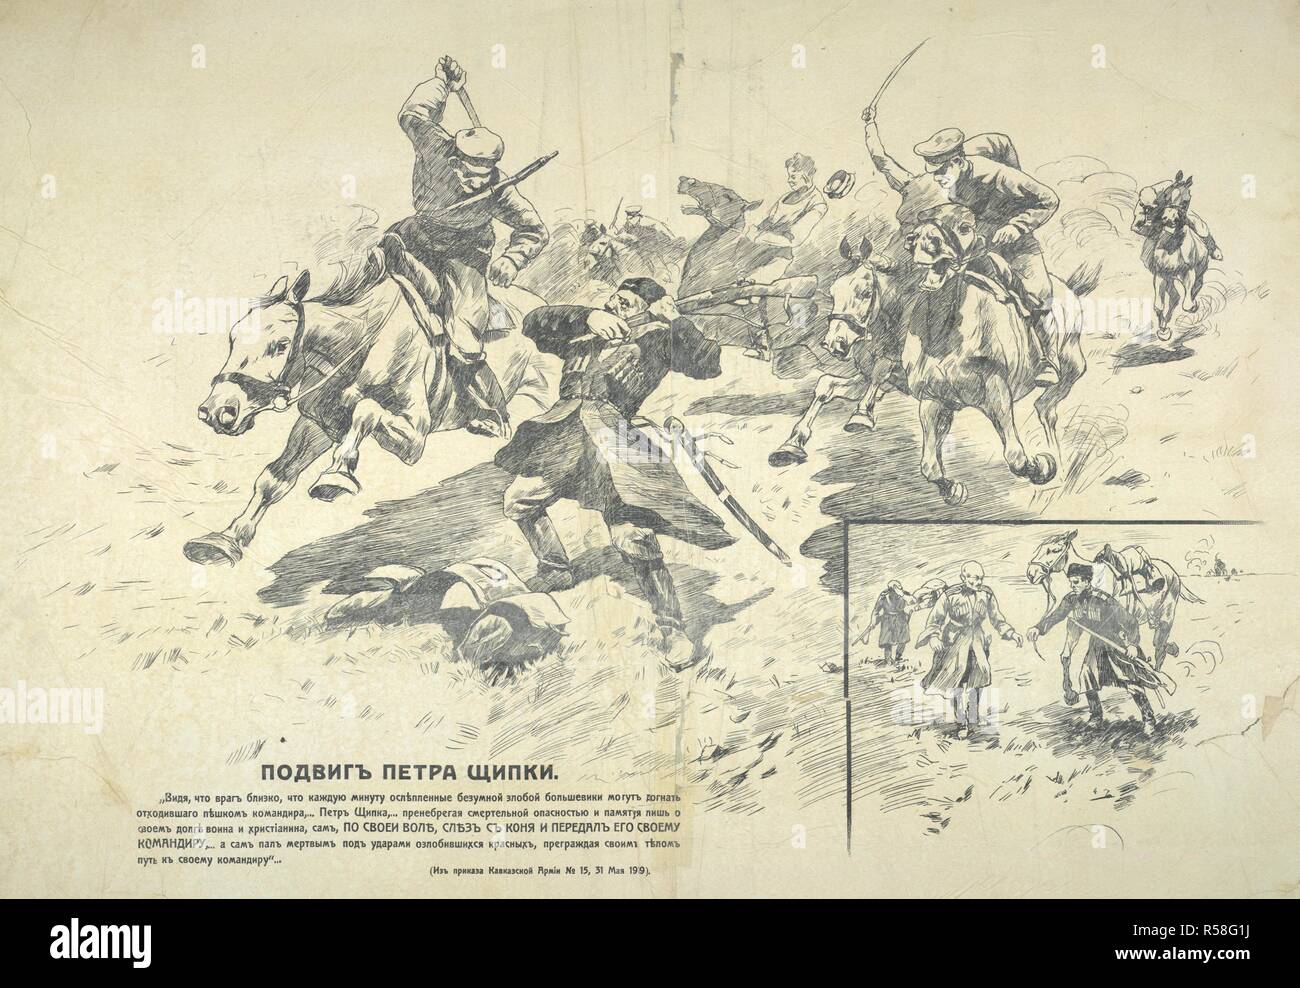 ÐŸÐ¾Ð´Ð²Ð¸Ð³ ÐŸÐµÑ‚Ñ€Ð° Ð©Ð¸Ð¿ÐºÐ¸.  Petr Shchipkiâ€™s heroic deed.   Depicts Petr being attacked by Red Armymen. [Black and White]. The text reads: 'Seeing that the enemy was near and that with every minute the bolsheviks, blind with terrible evil, might catch up with the Commander, who was fleeing on foot...Petr Shchipka...disregarding the mortal danger and thinking only of his duty to the war and to christians, himself, OF HIS OWN WILL, DISMOUNTED FROM HIS HORSE and GAVE THE HORSE TO HIS COMMANDER.... he himself fell to his death under the blows of the embittered Reds, blocking the route to Stock Photo